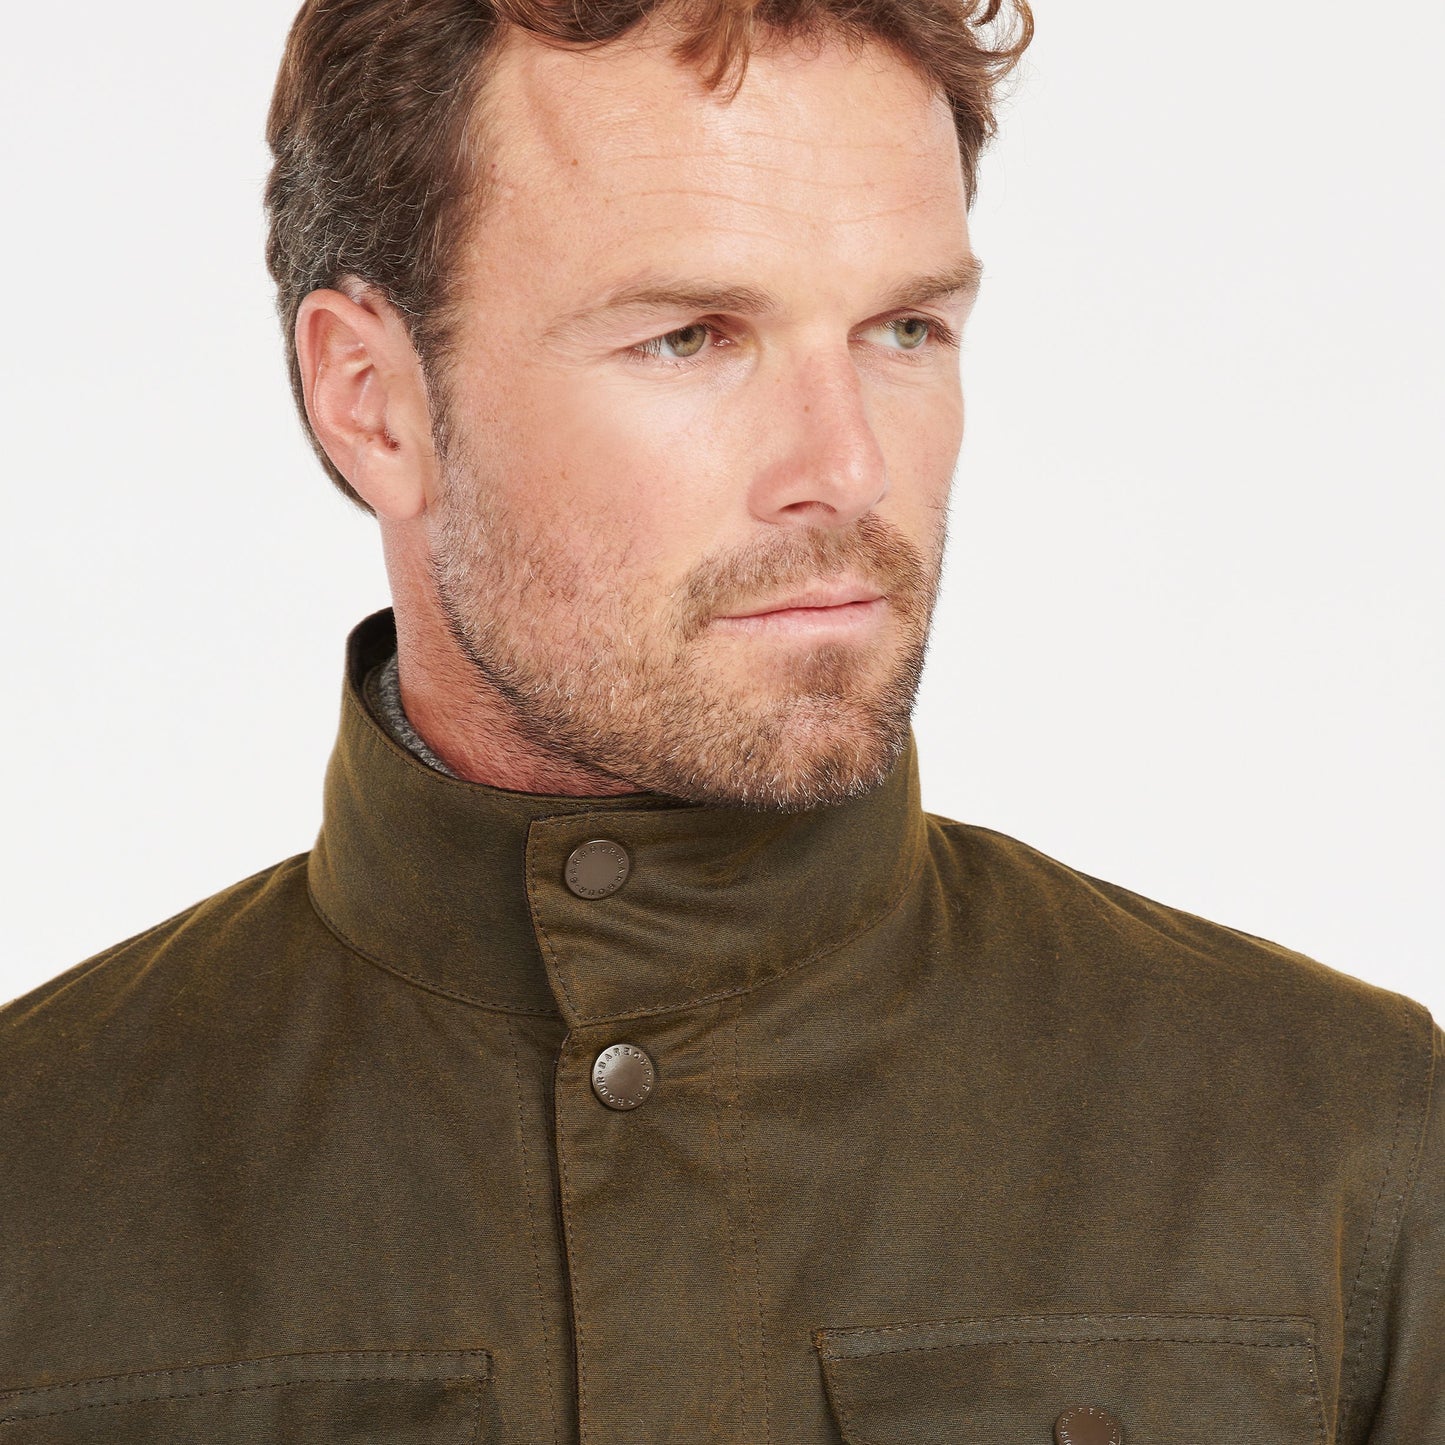 Barbour Ogston Olive Green Wax Jacket